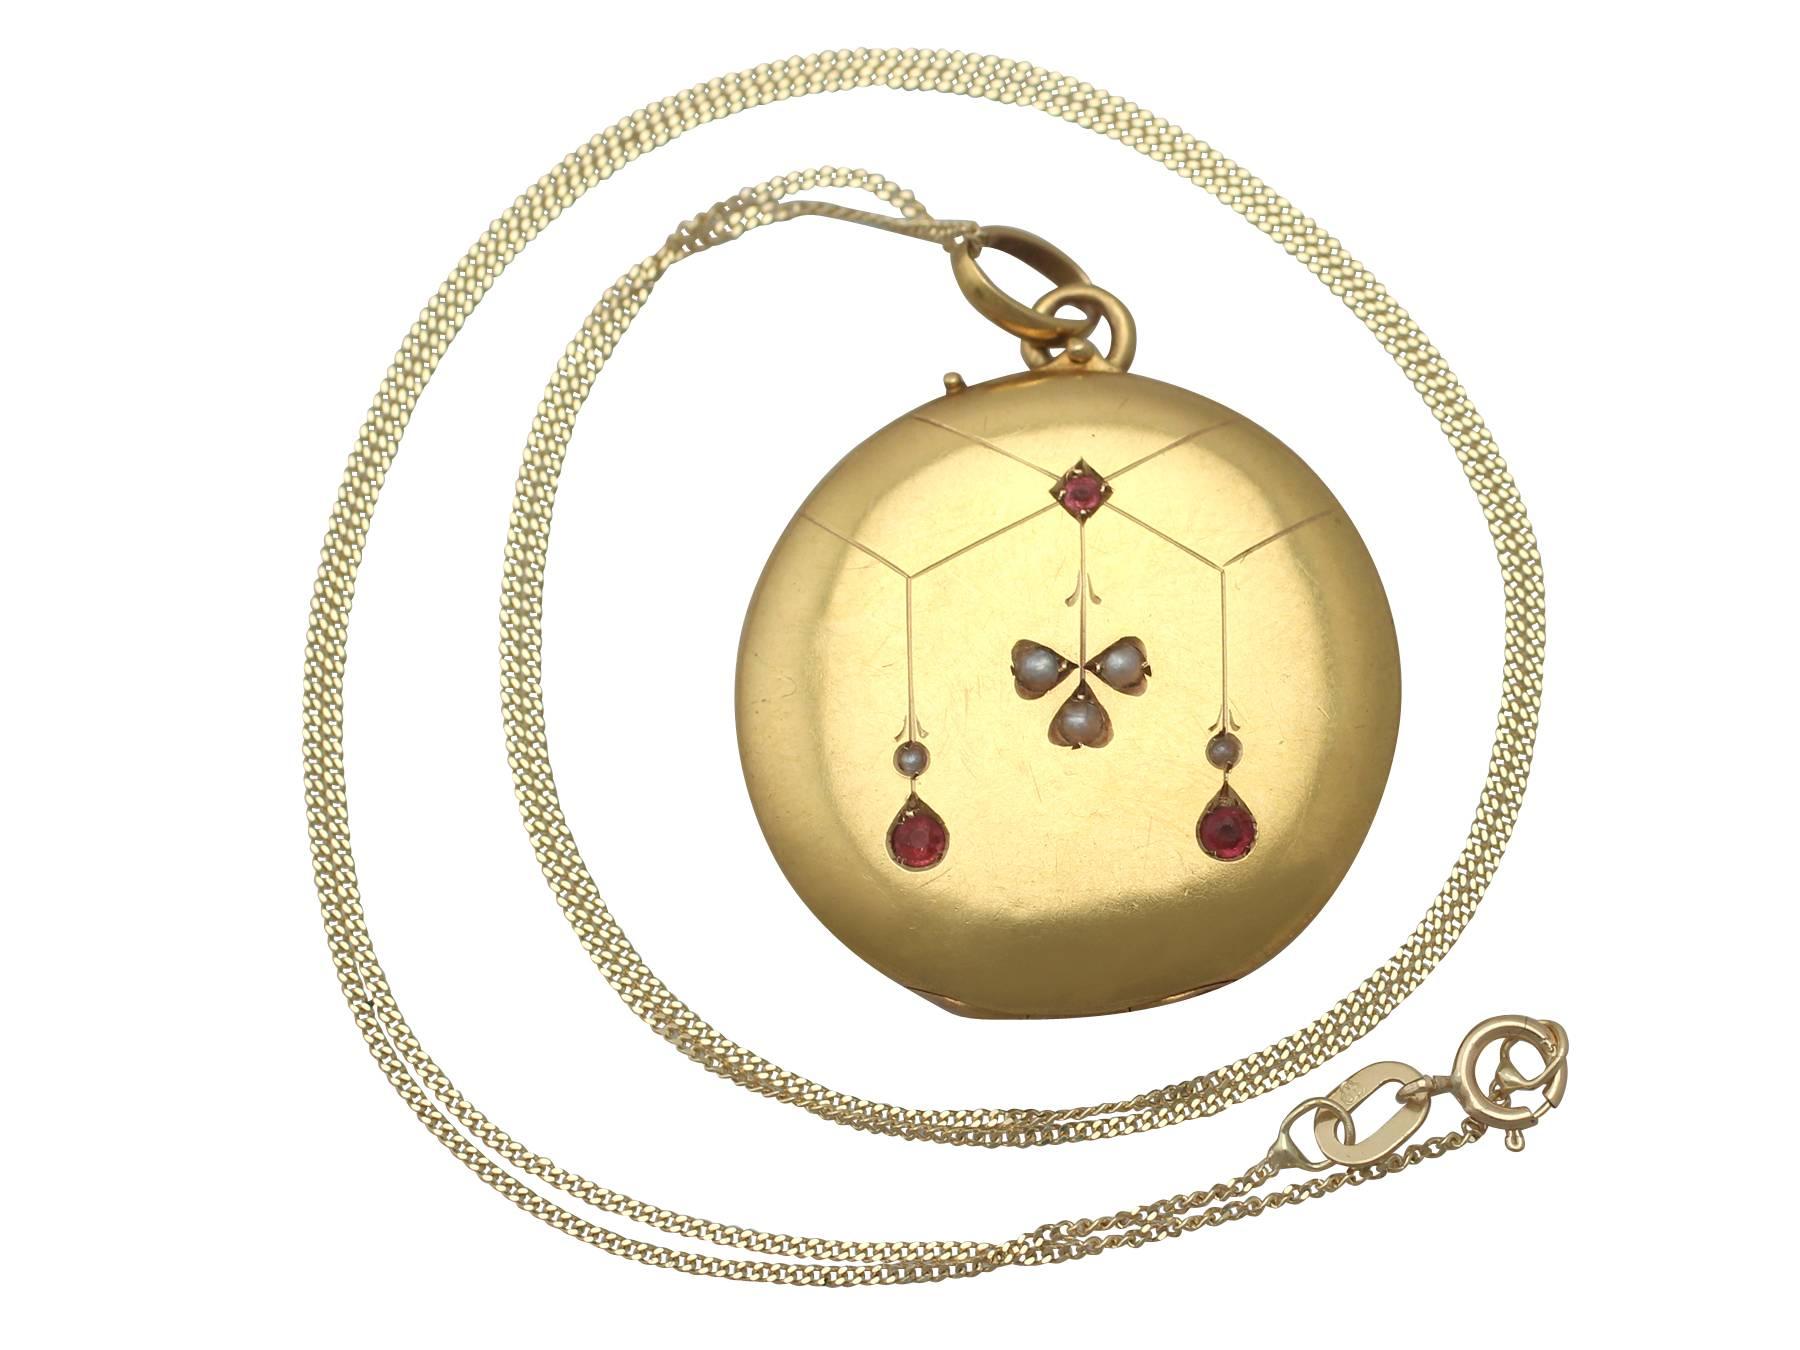 This fine and impressive Edwardian locket has been crafted in 18k yellow gold.

The locket has a circular form.

The anterior face of the locket has an engraved decoration and is embellished with five seed pearls and three round cut